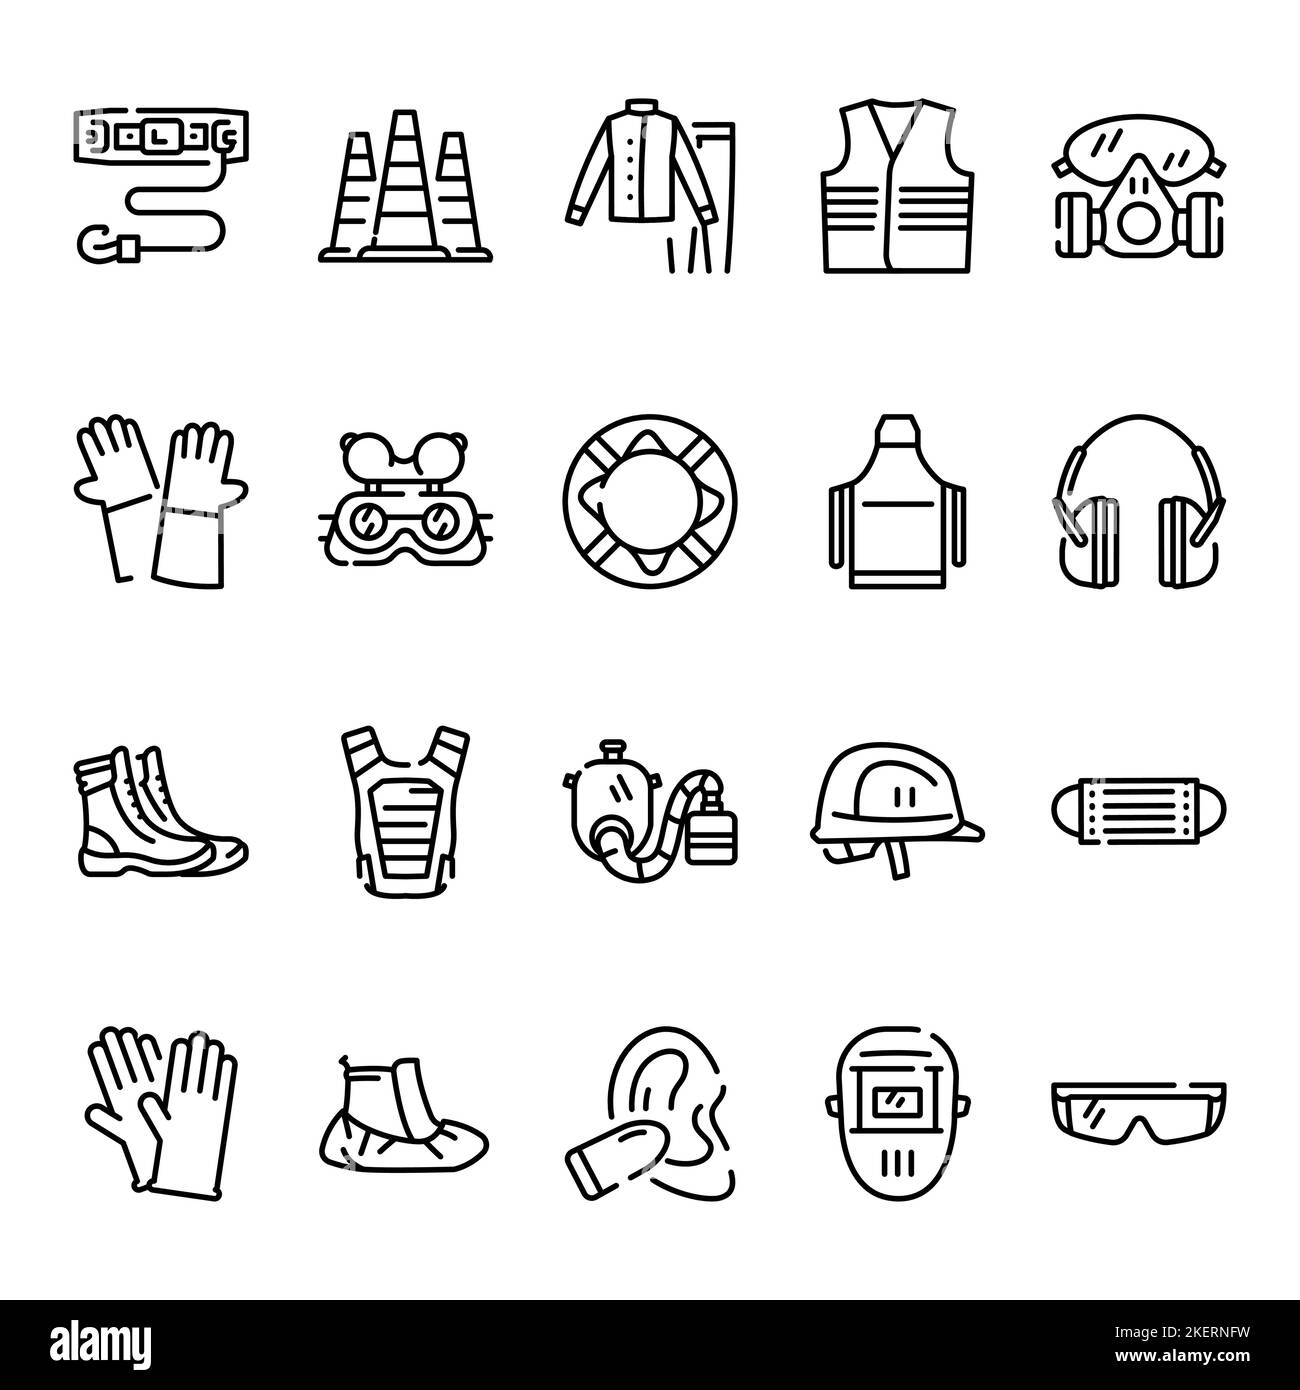 Personal protection line icons set. Elements of work uniform. Editable stroke. Stock Vector